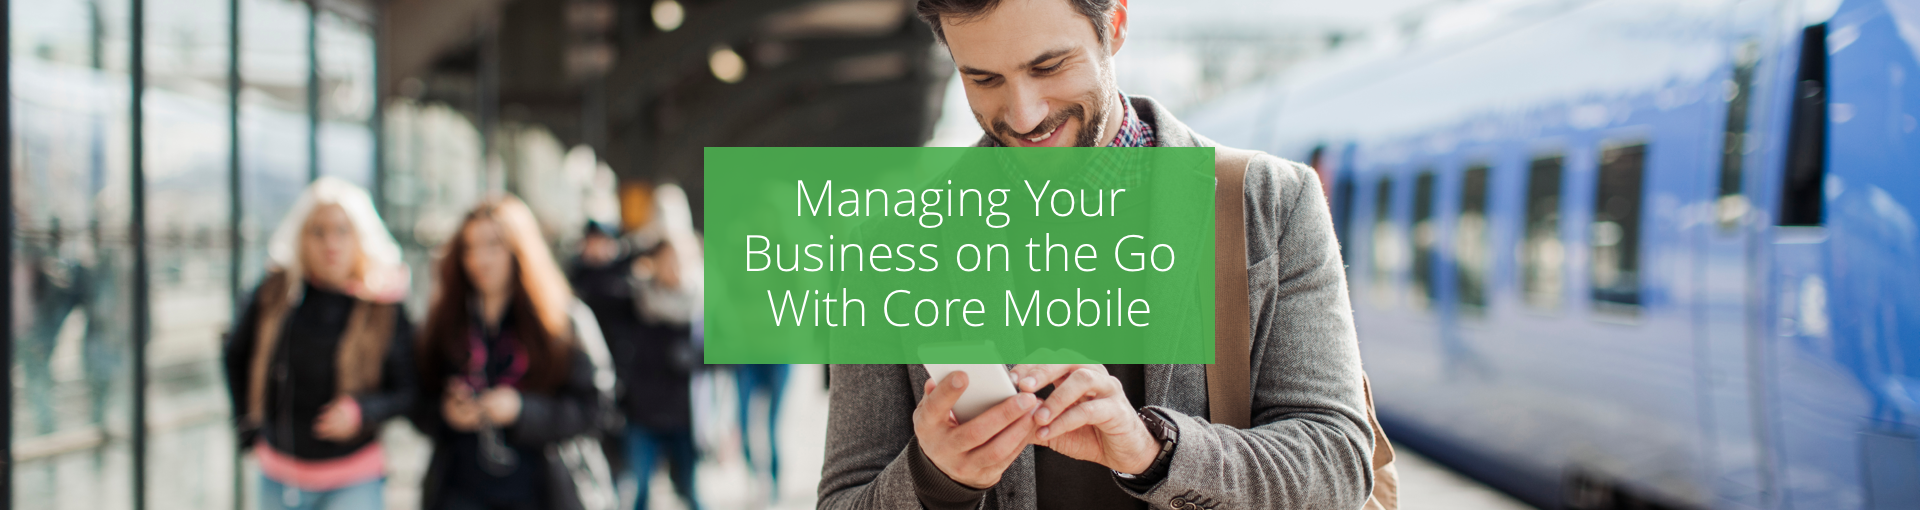 Managing Your Business on the Go With CORE Mobile Featured Image